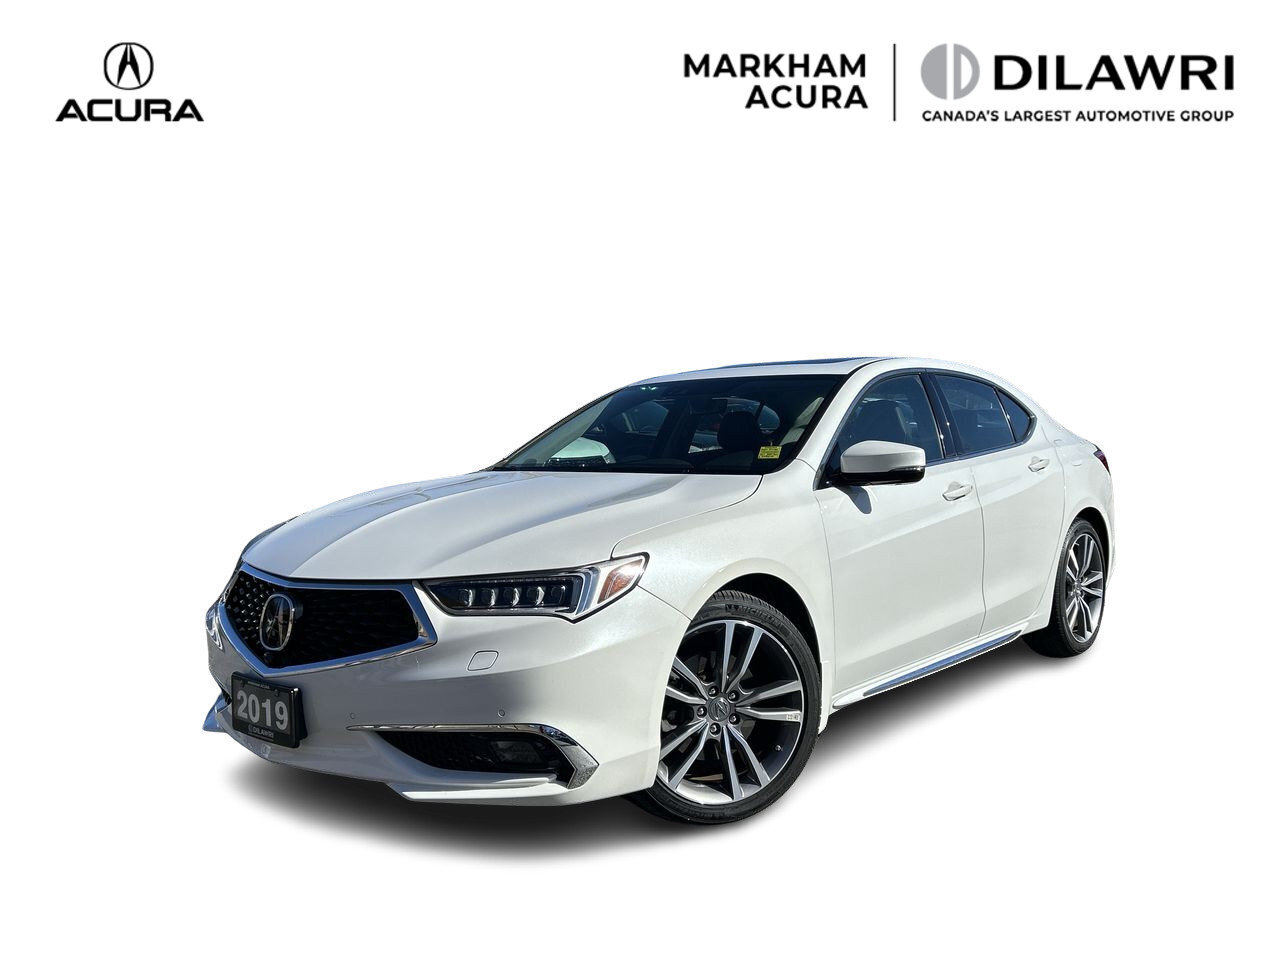 2019 Acura TLX 3.5L SH-AWD Elite Wireless Charger | Vented Seats 